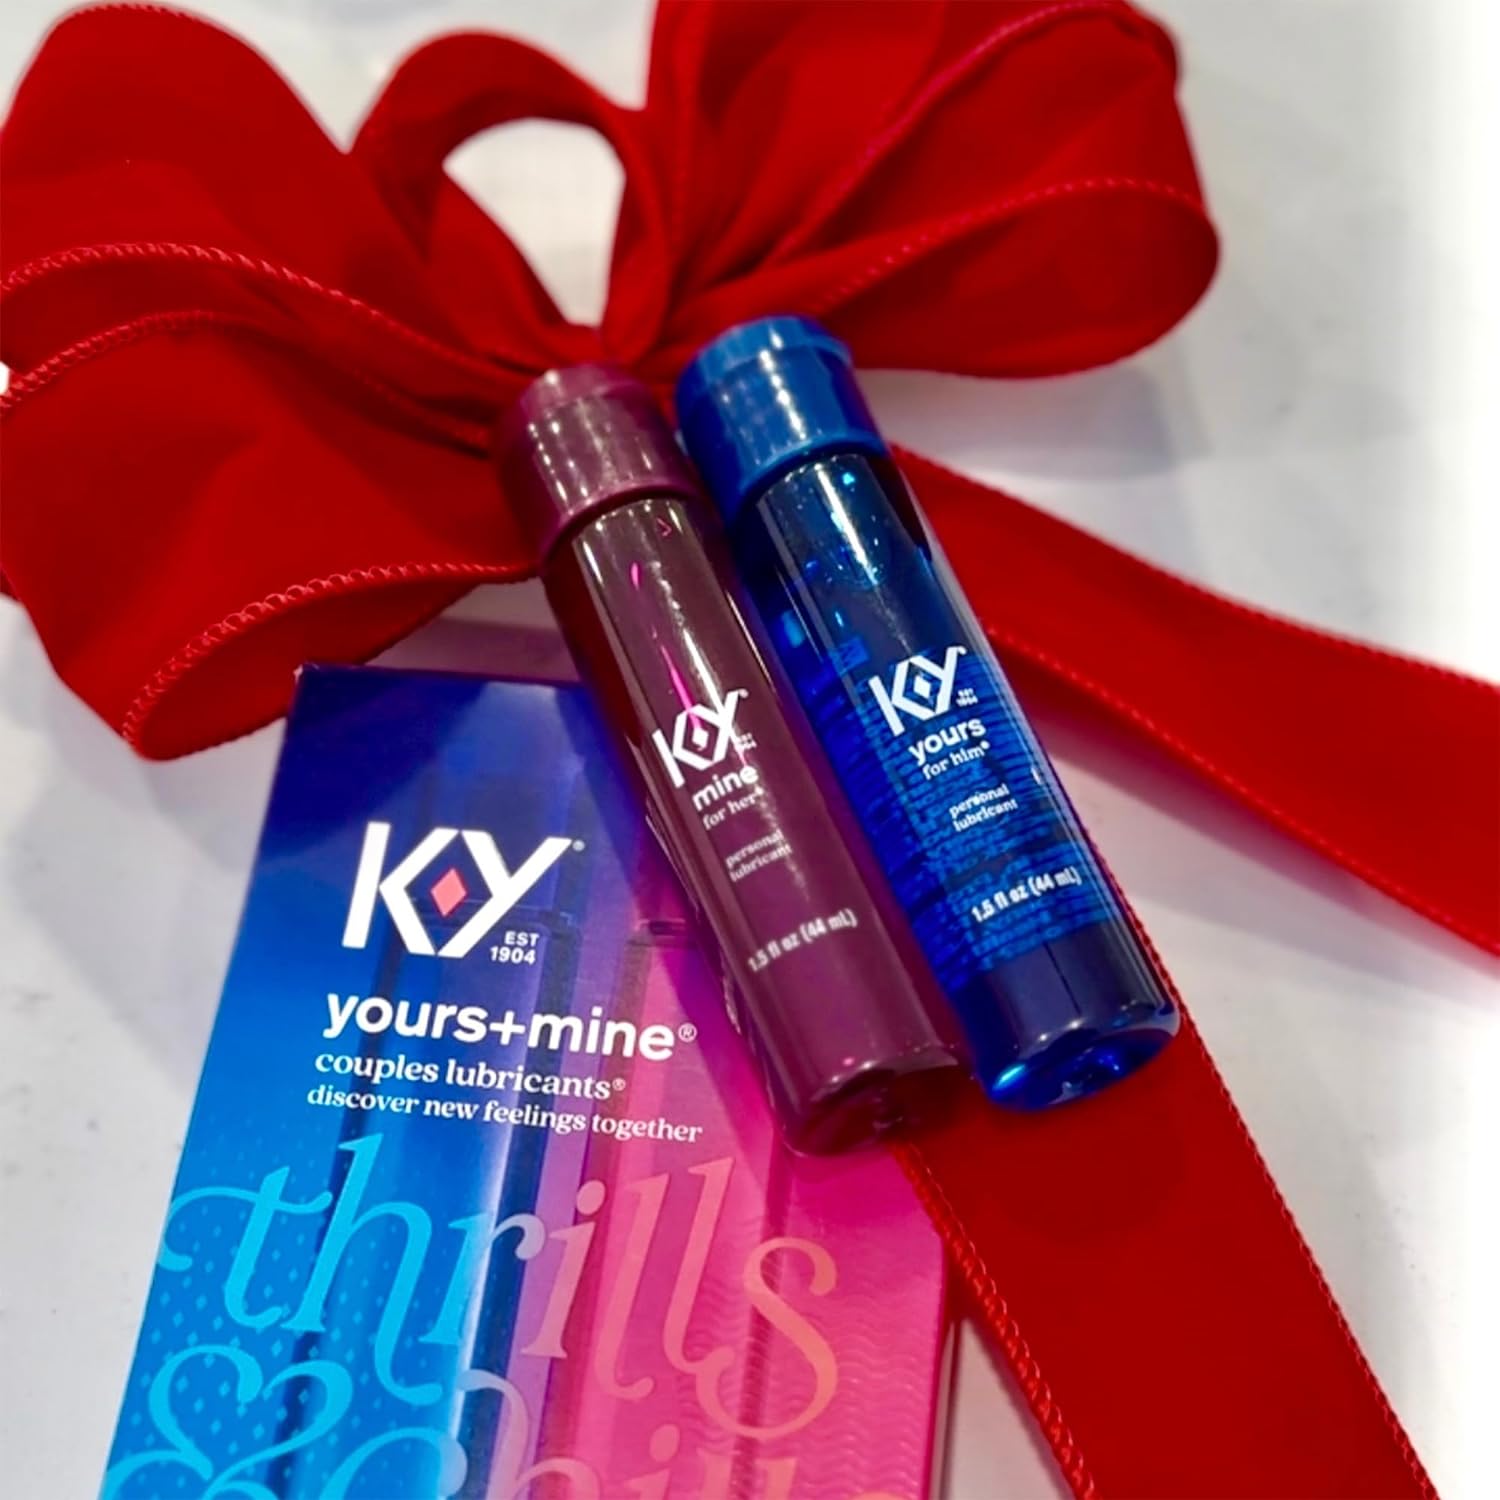 K-Y Yours + Mine Couples Personal Lube